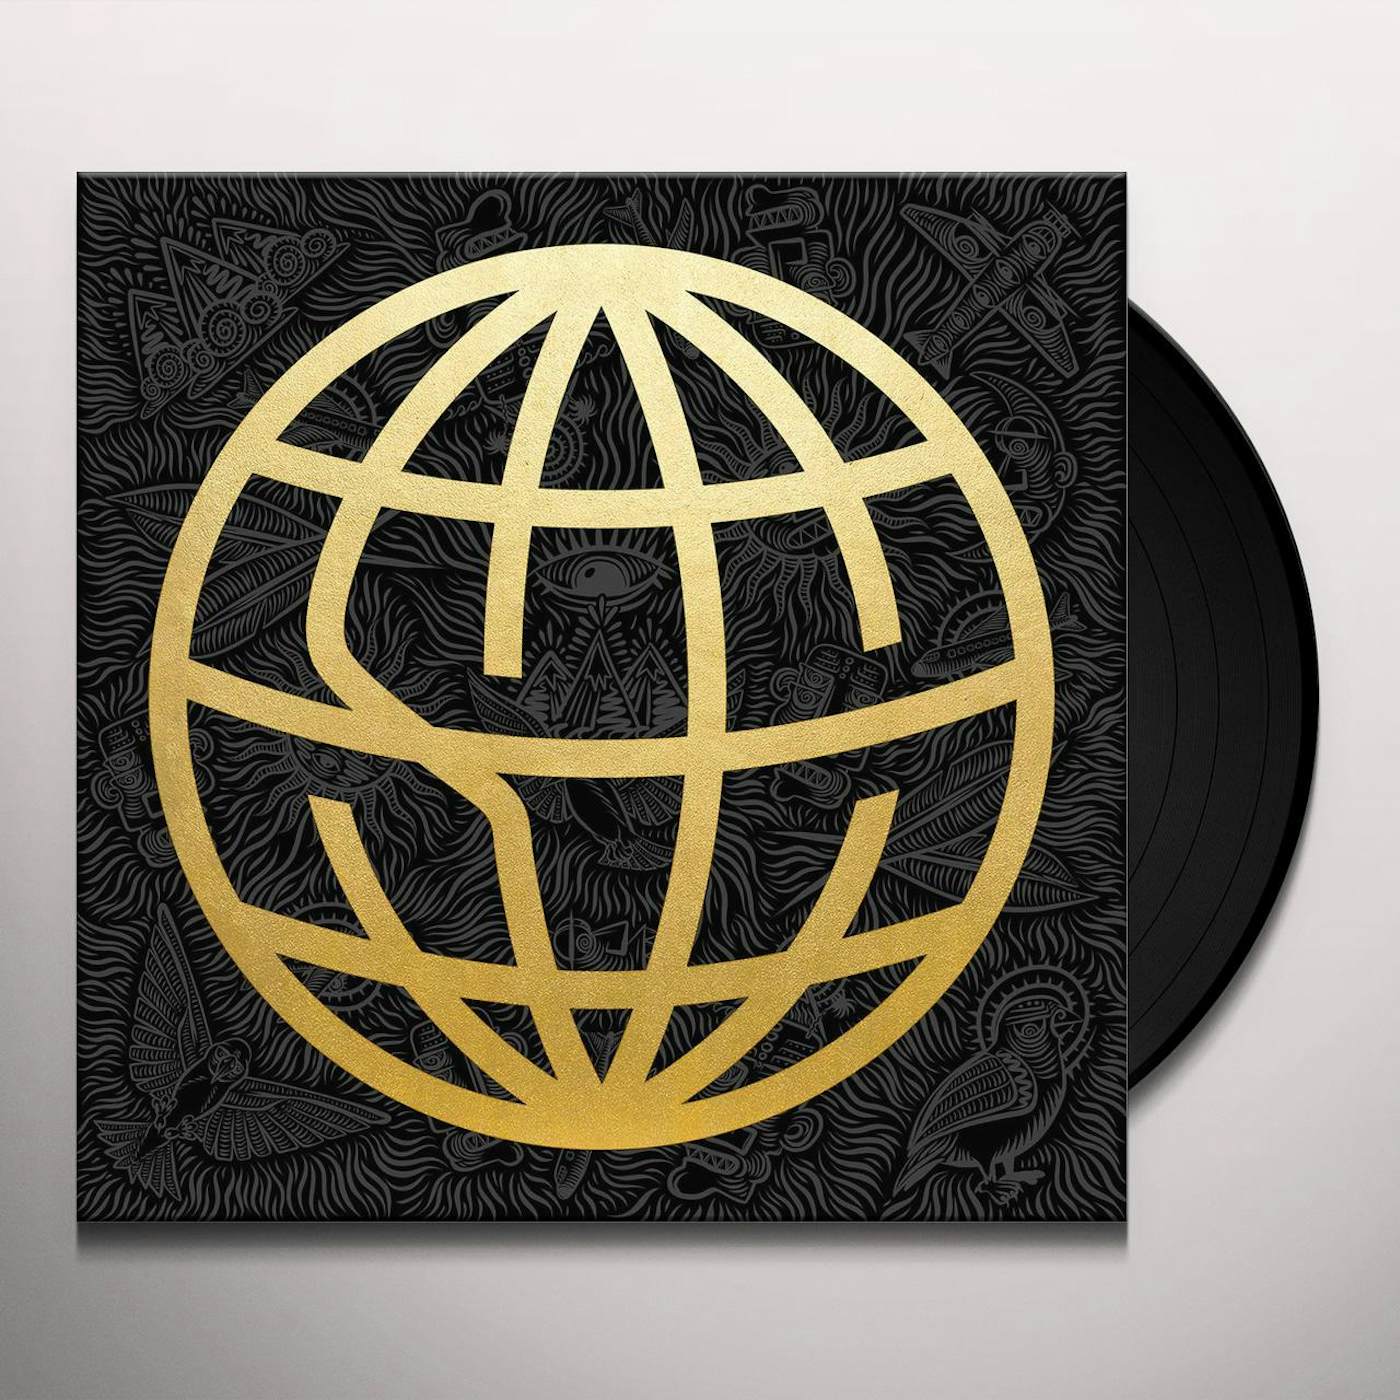 State Champs Around the World and Back Vinyl Record